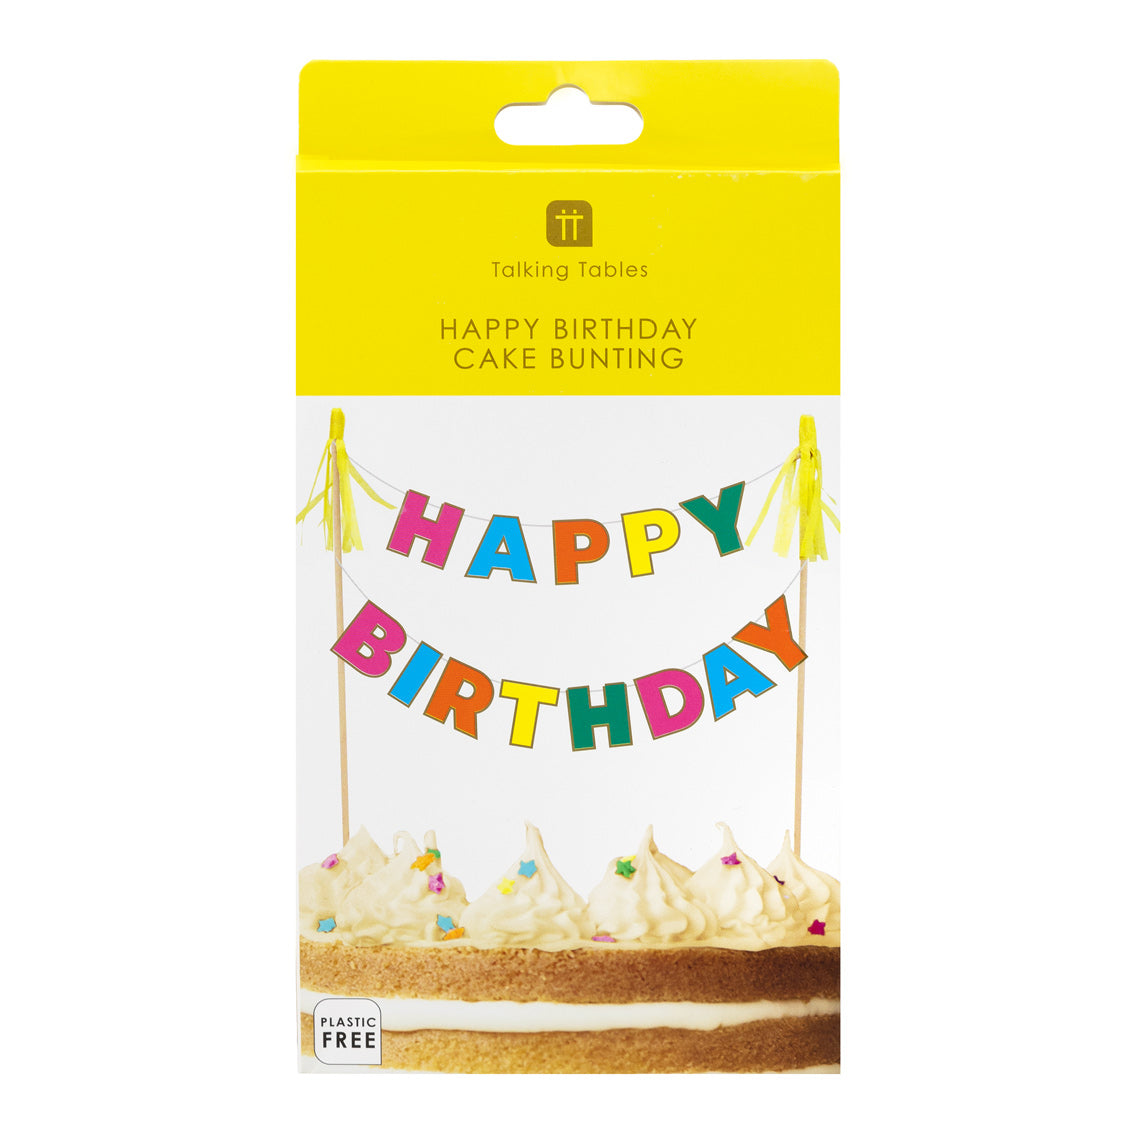 Happy Birthday Bunting Cake Topper in packaging by penny black